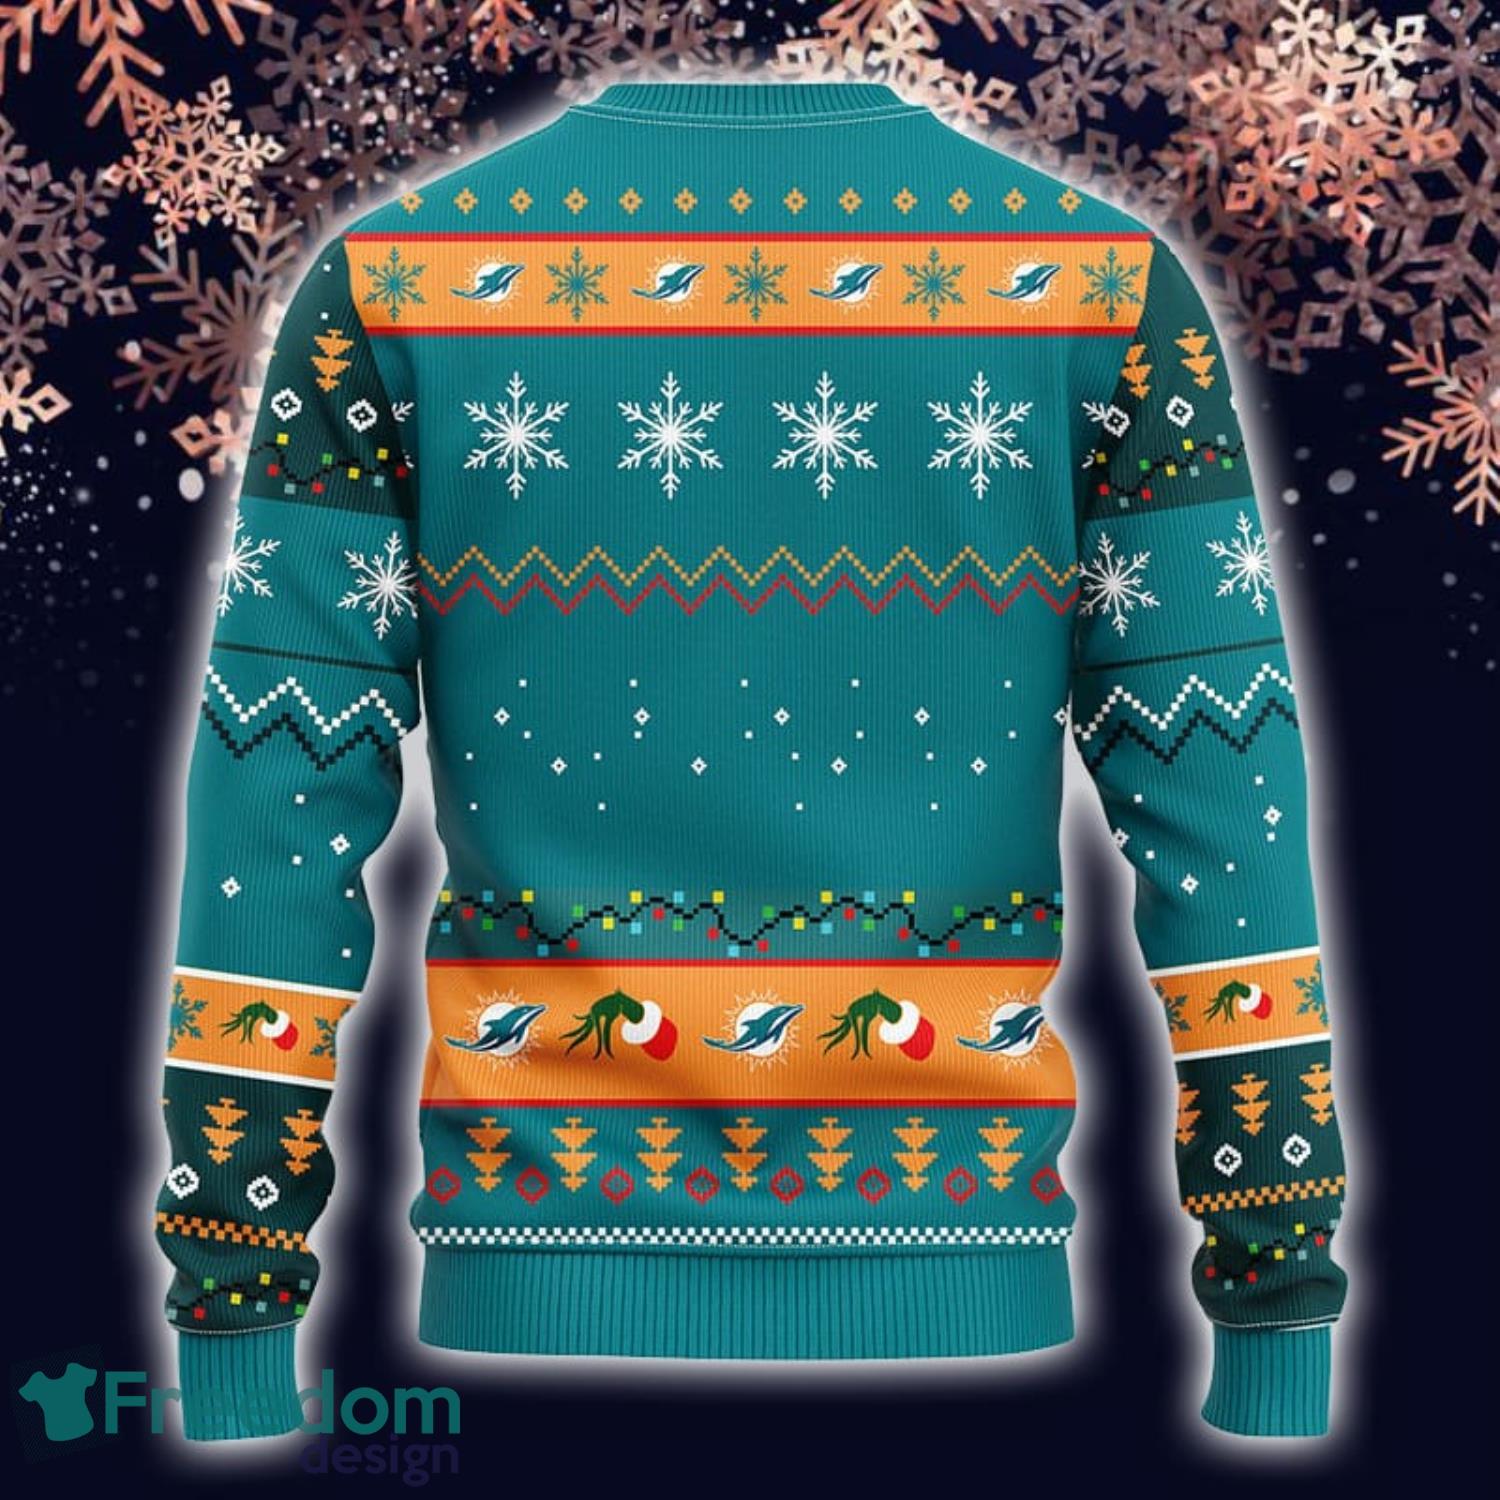 Miami Dolphins Christmas Grinch Sweater For Fans - Banantees